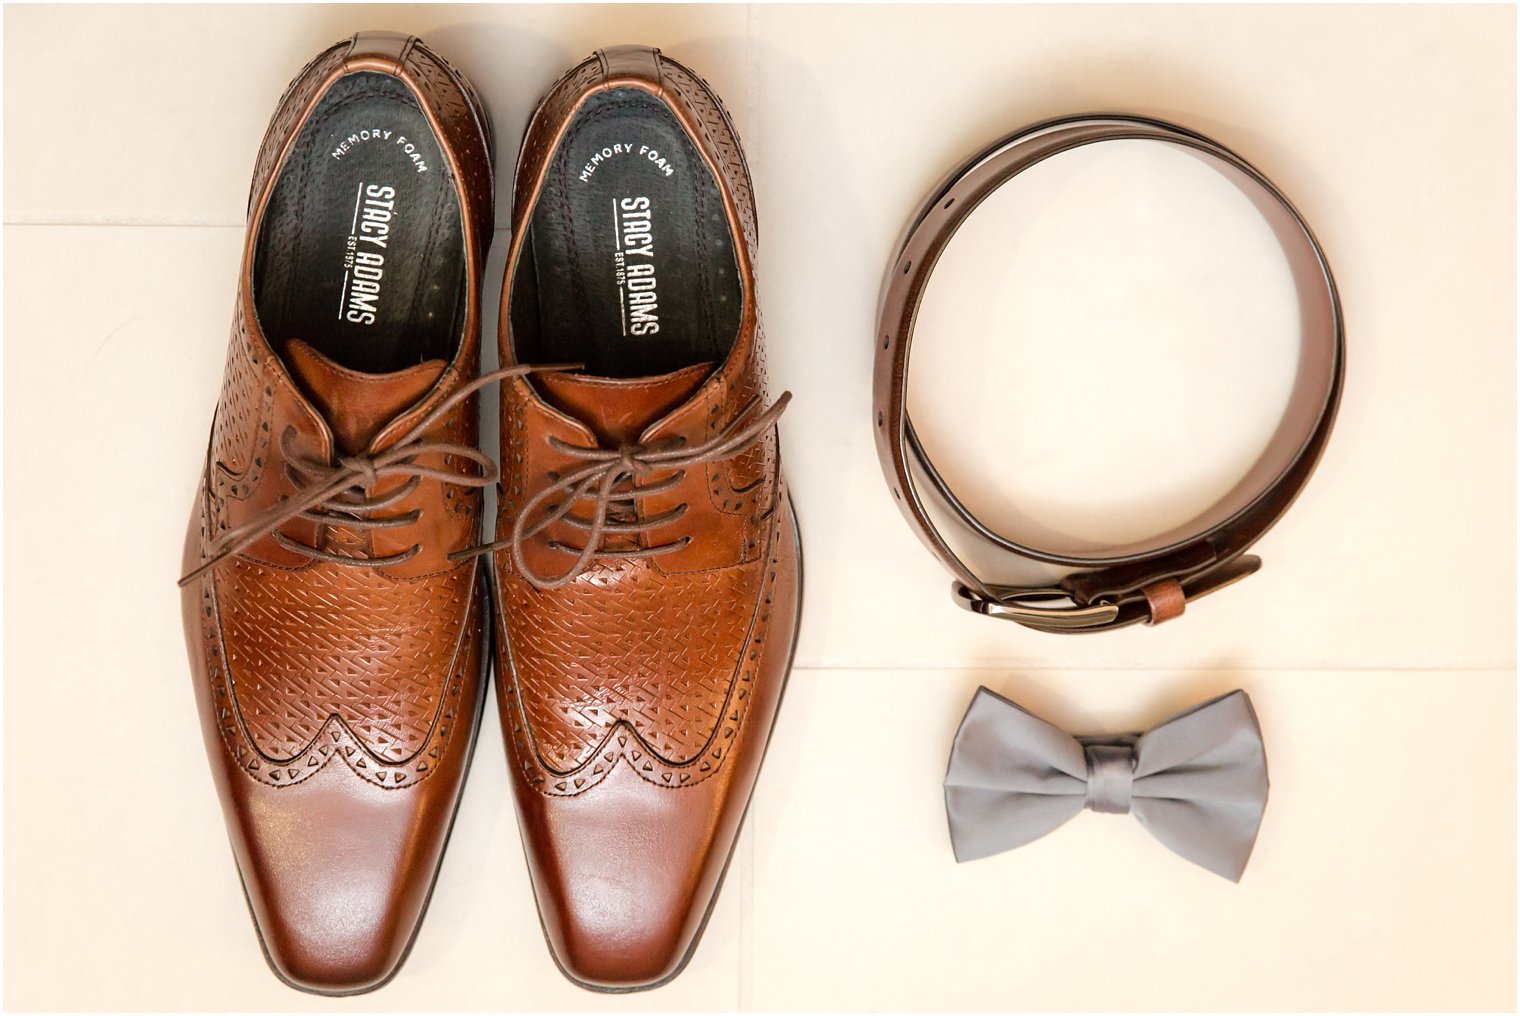 Stacy Adams men's shoes for wedding day